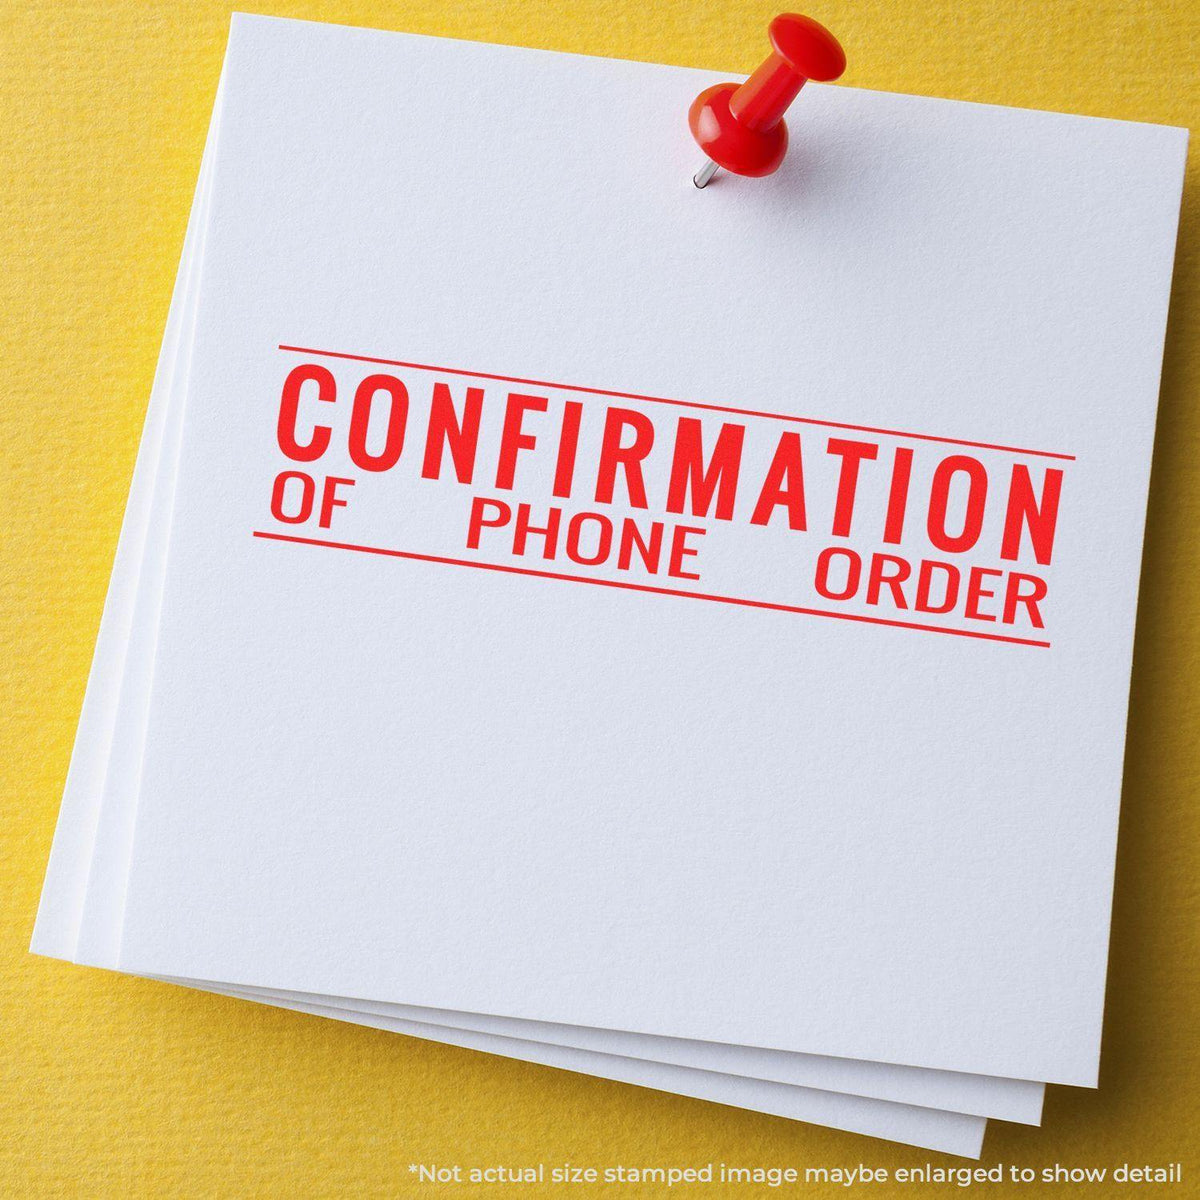 Large Confirmation of Phone Order Rubber Stamp In Use Photo